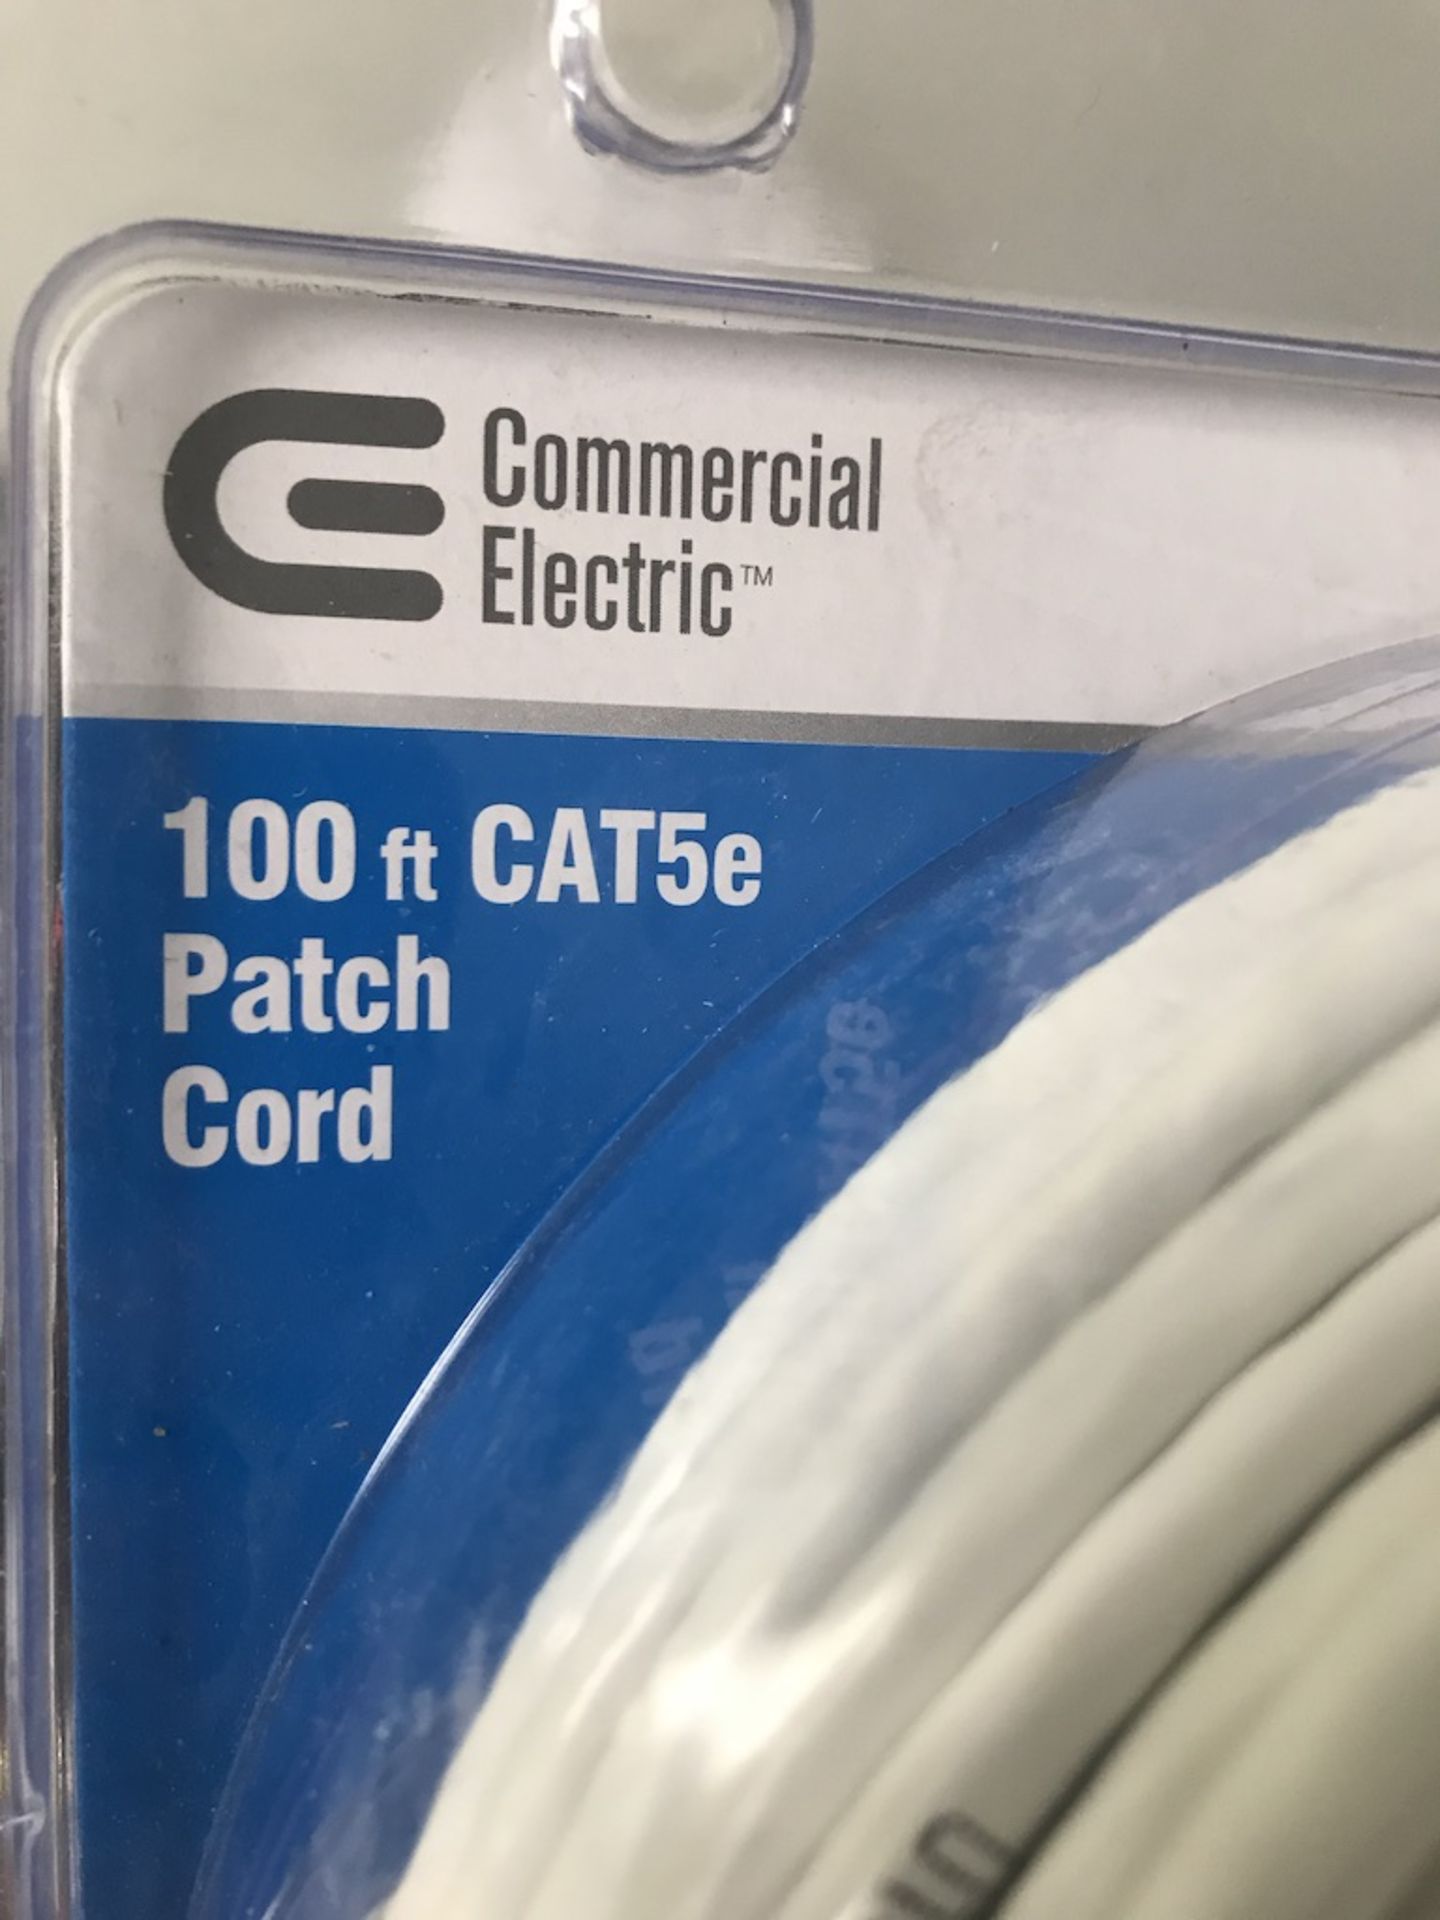 LOT OF: (1) 25' CAT 5E CORD AND (1) 100' CAT 5E CORD - Image 4 of 4